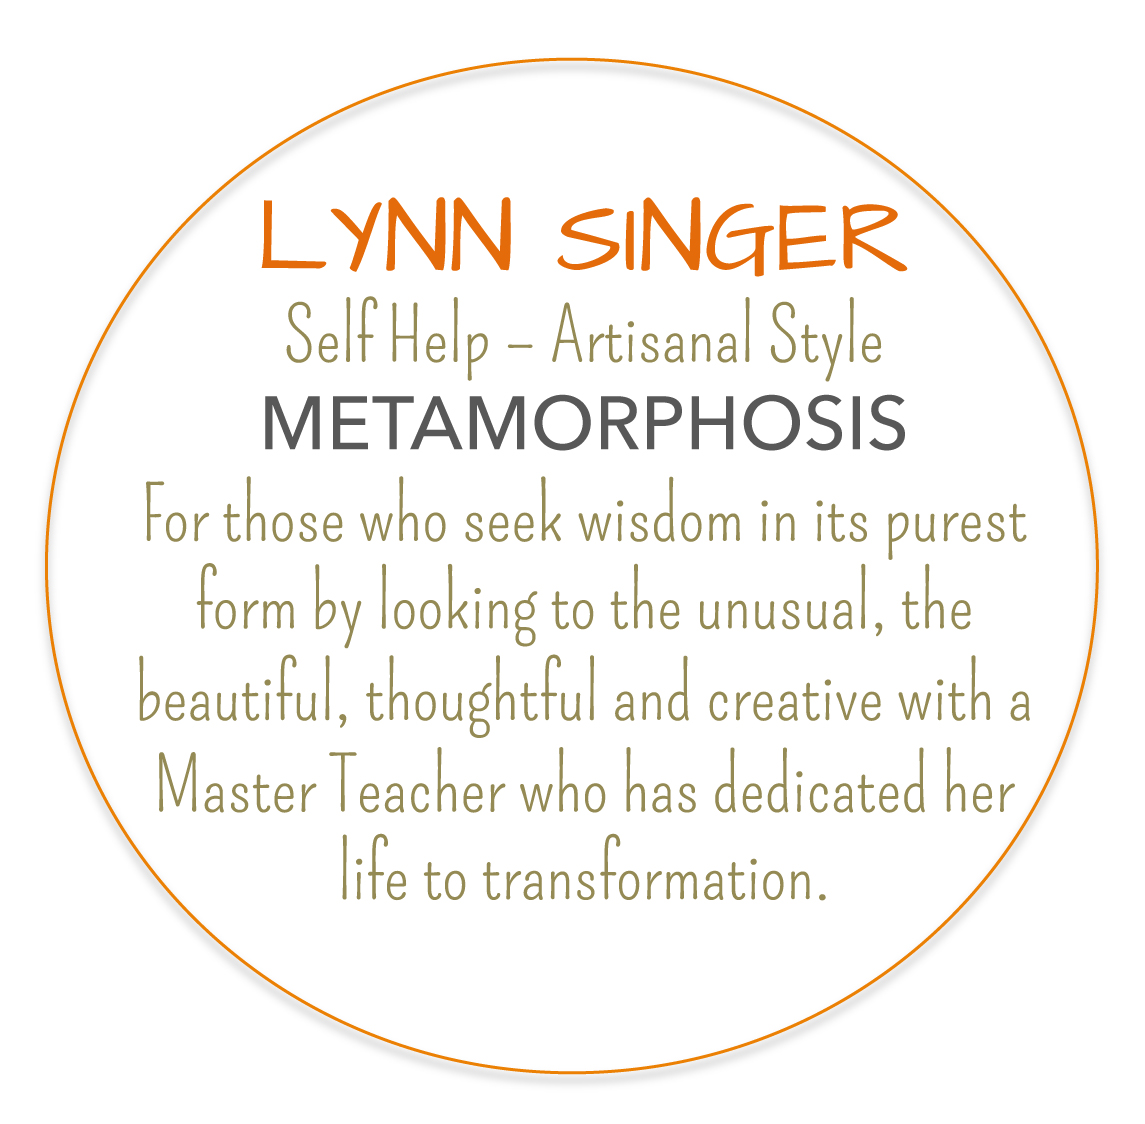 LYNN SINGER - Self Help – Artisanal Style - METAMORPHOSIS - For those who seek wisdom in its purest form by looking to the unusual, the beautiful, thoughtful and creative with a Master Teacher who has dedicated her life to transformation.